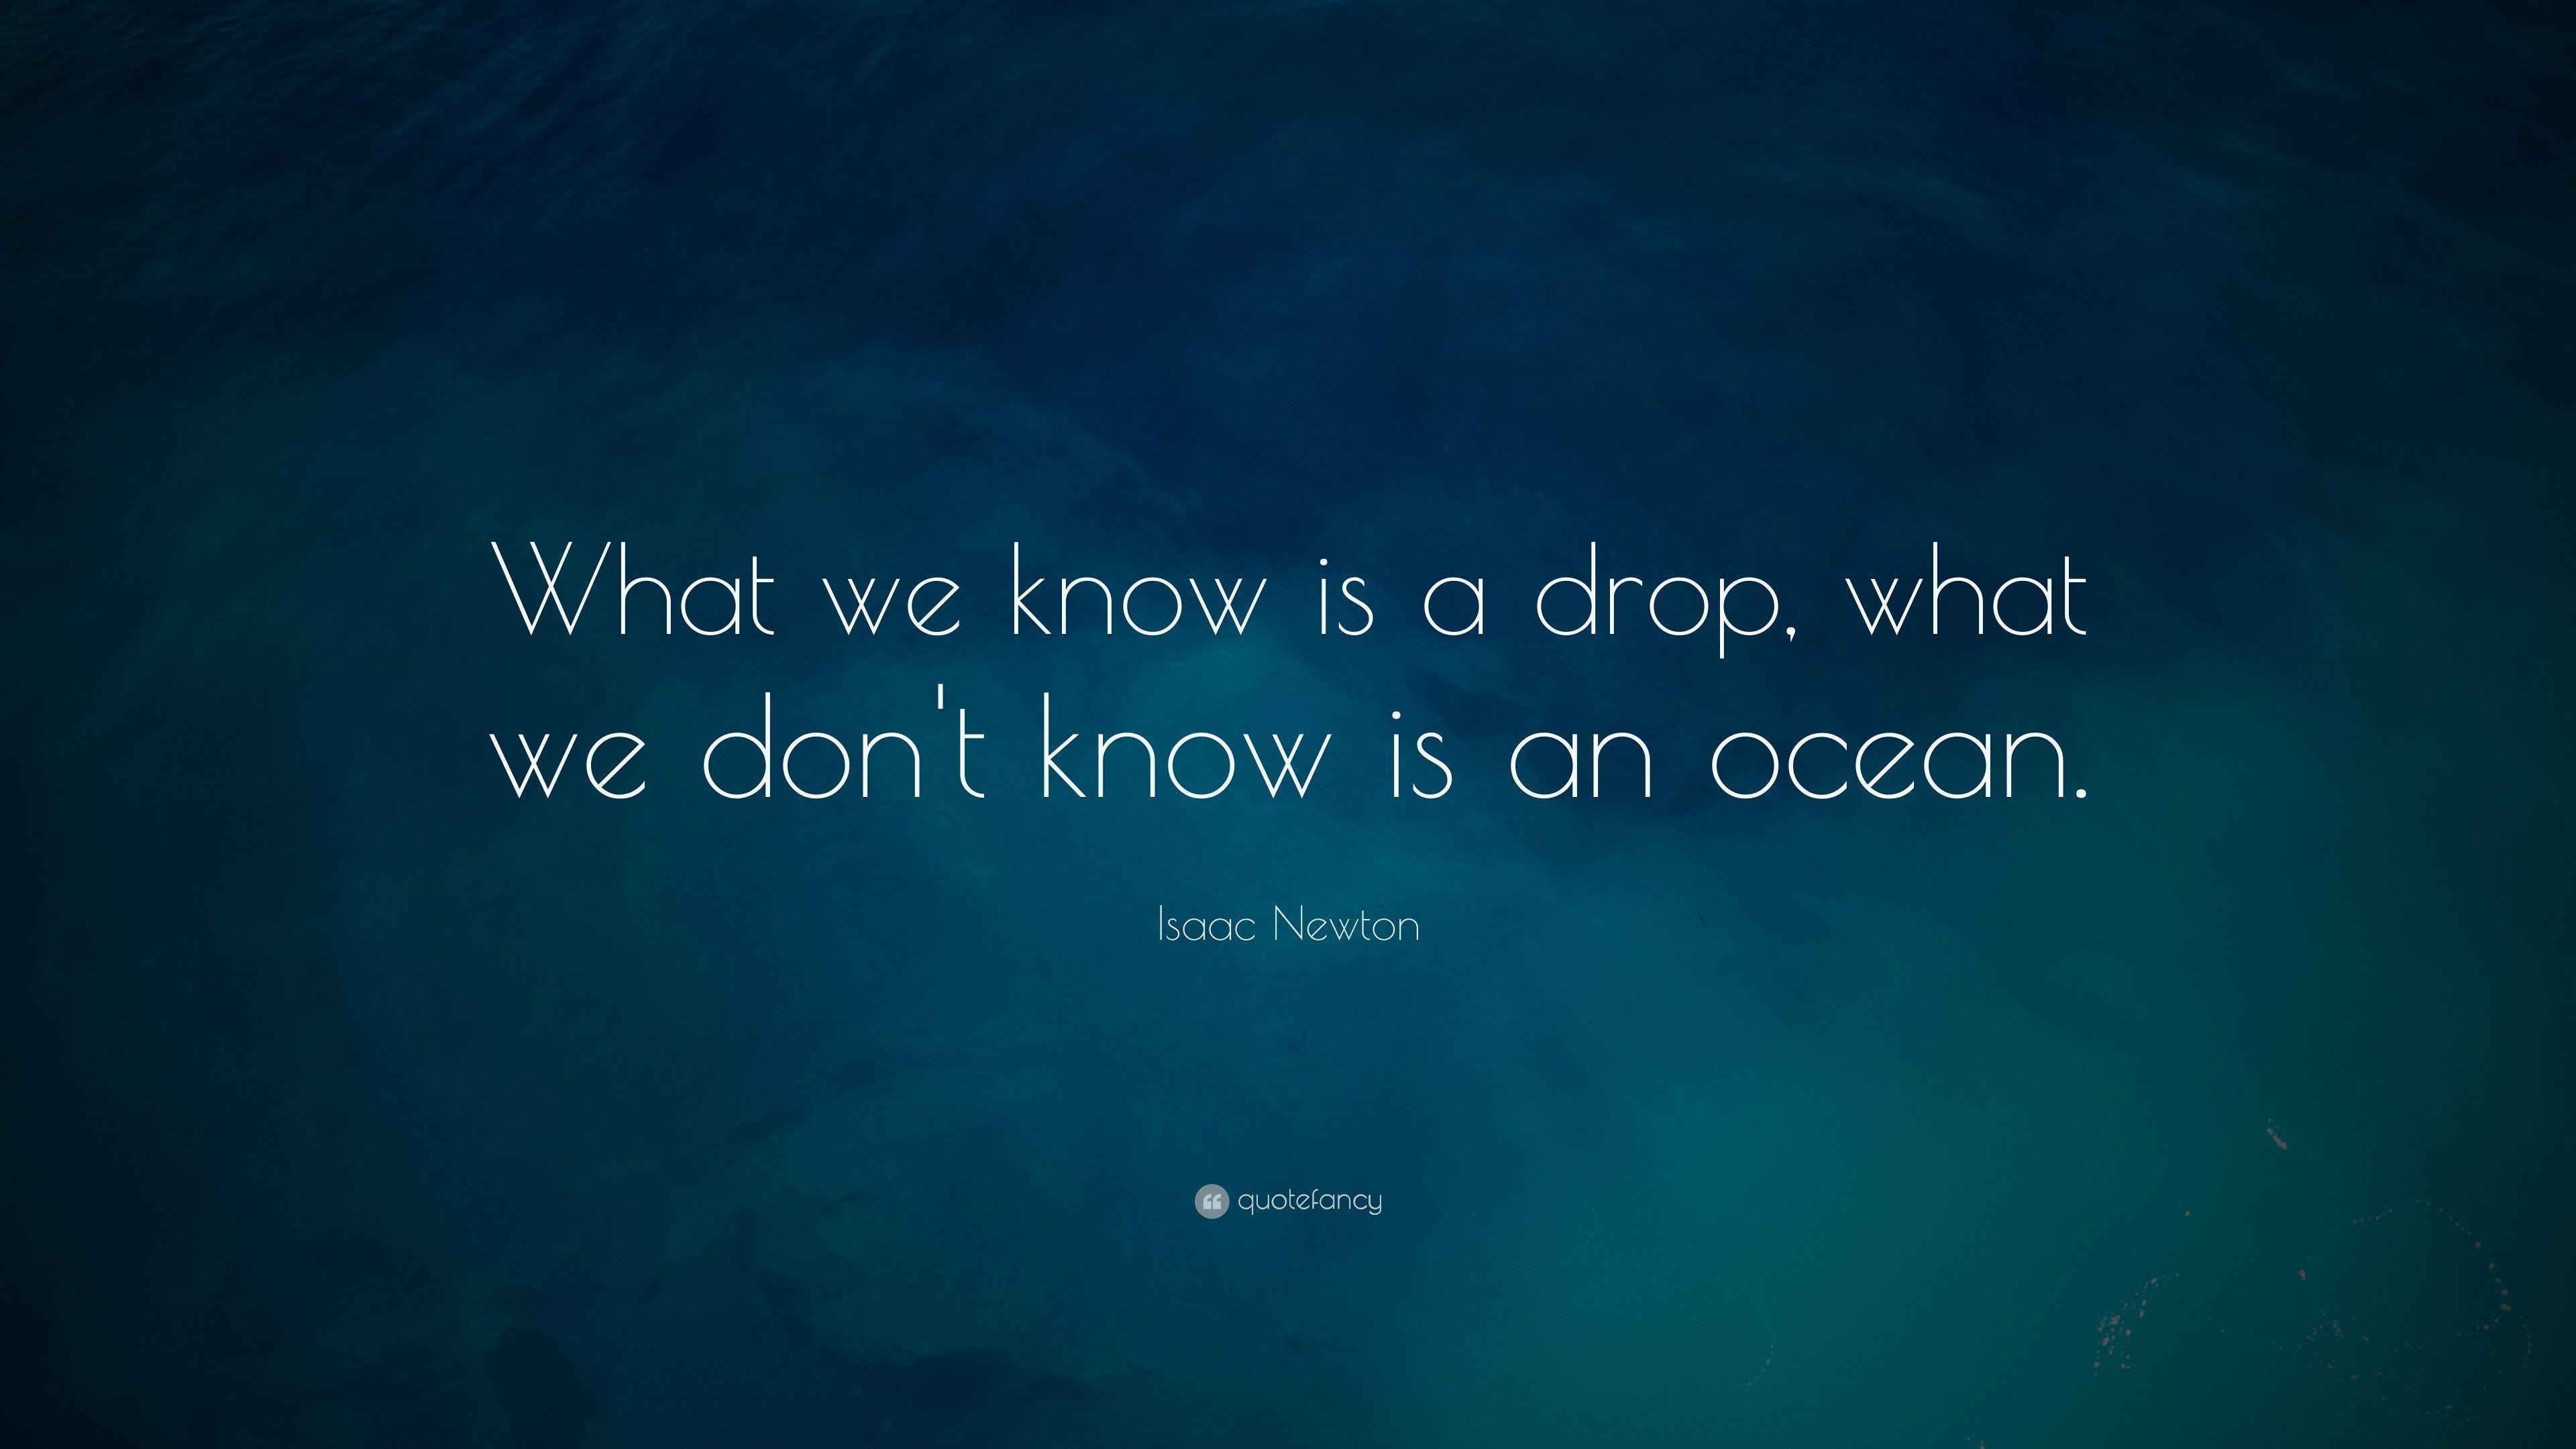 Isaac Newton Quote: “What we know is a drop, what we don't know is